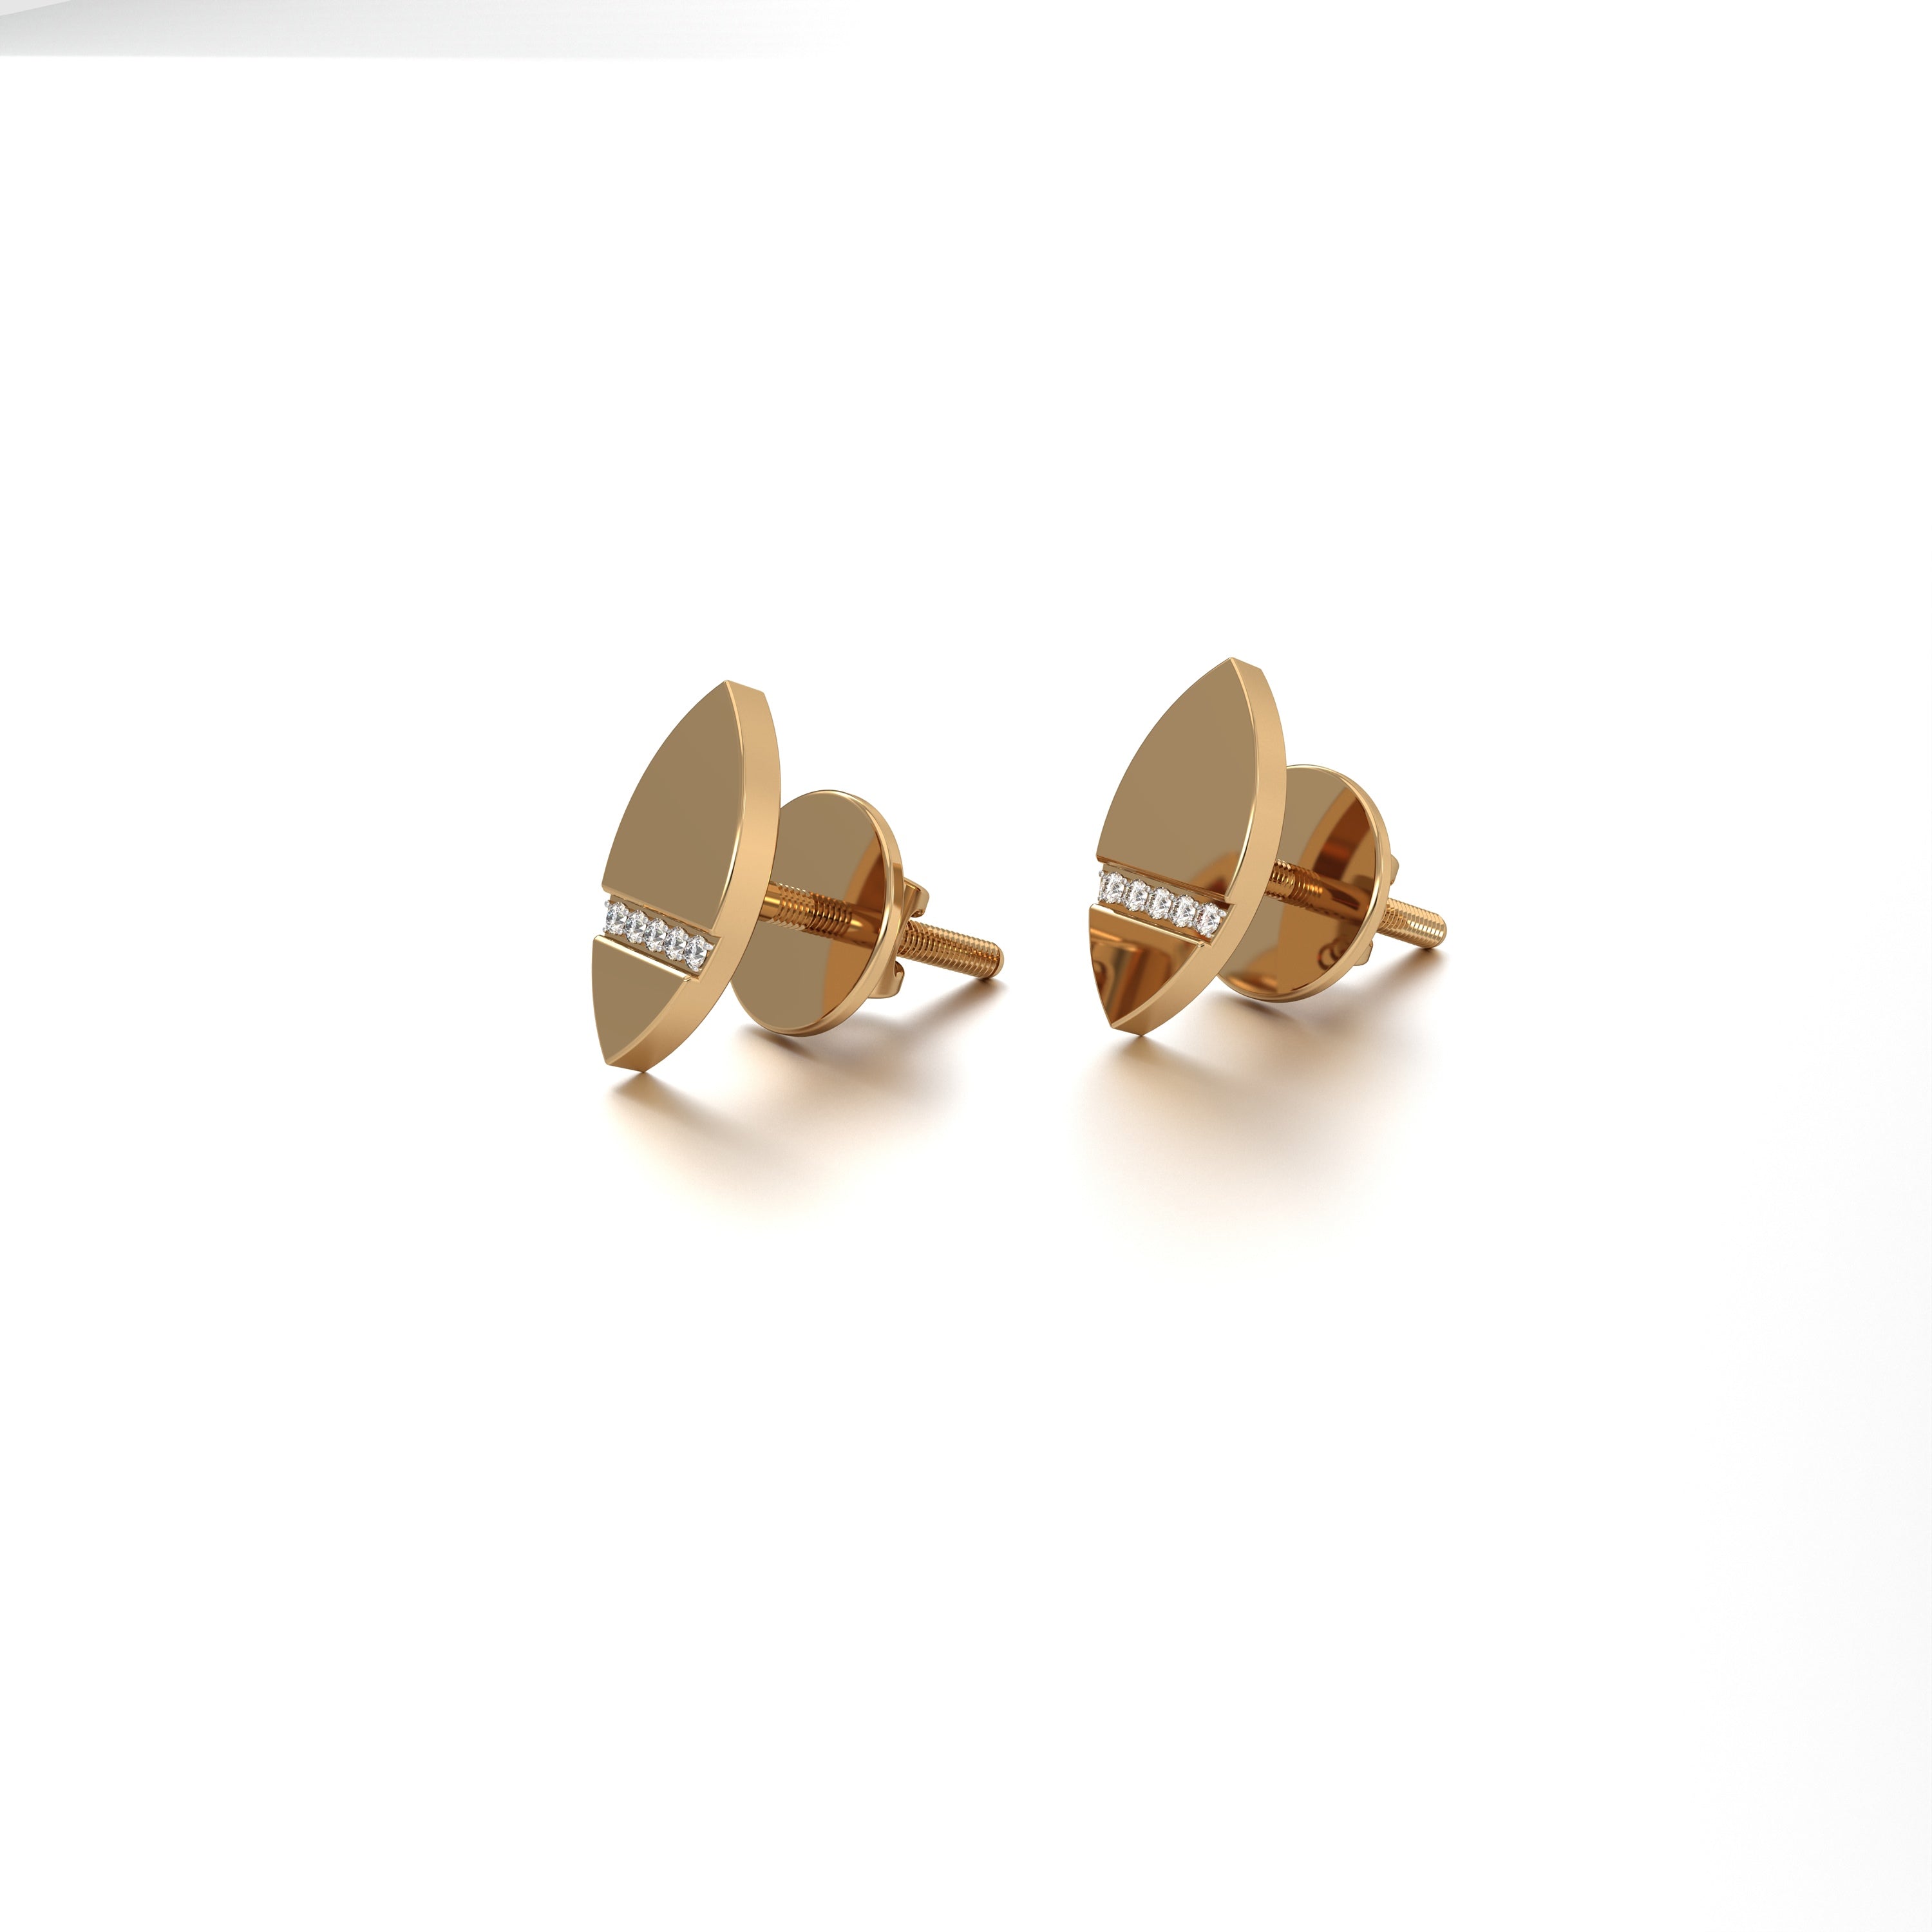 Aurm Marquise - 'Set the bar' - Studs Small